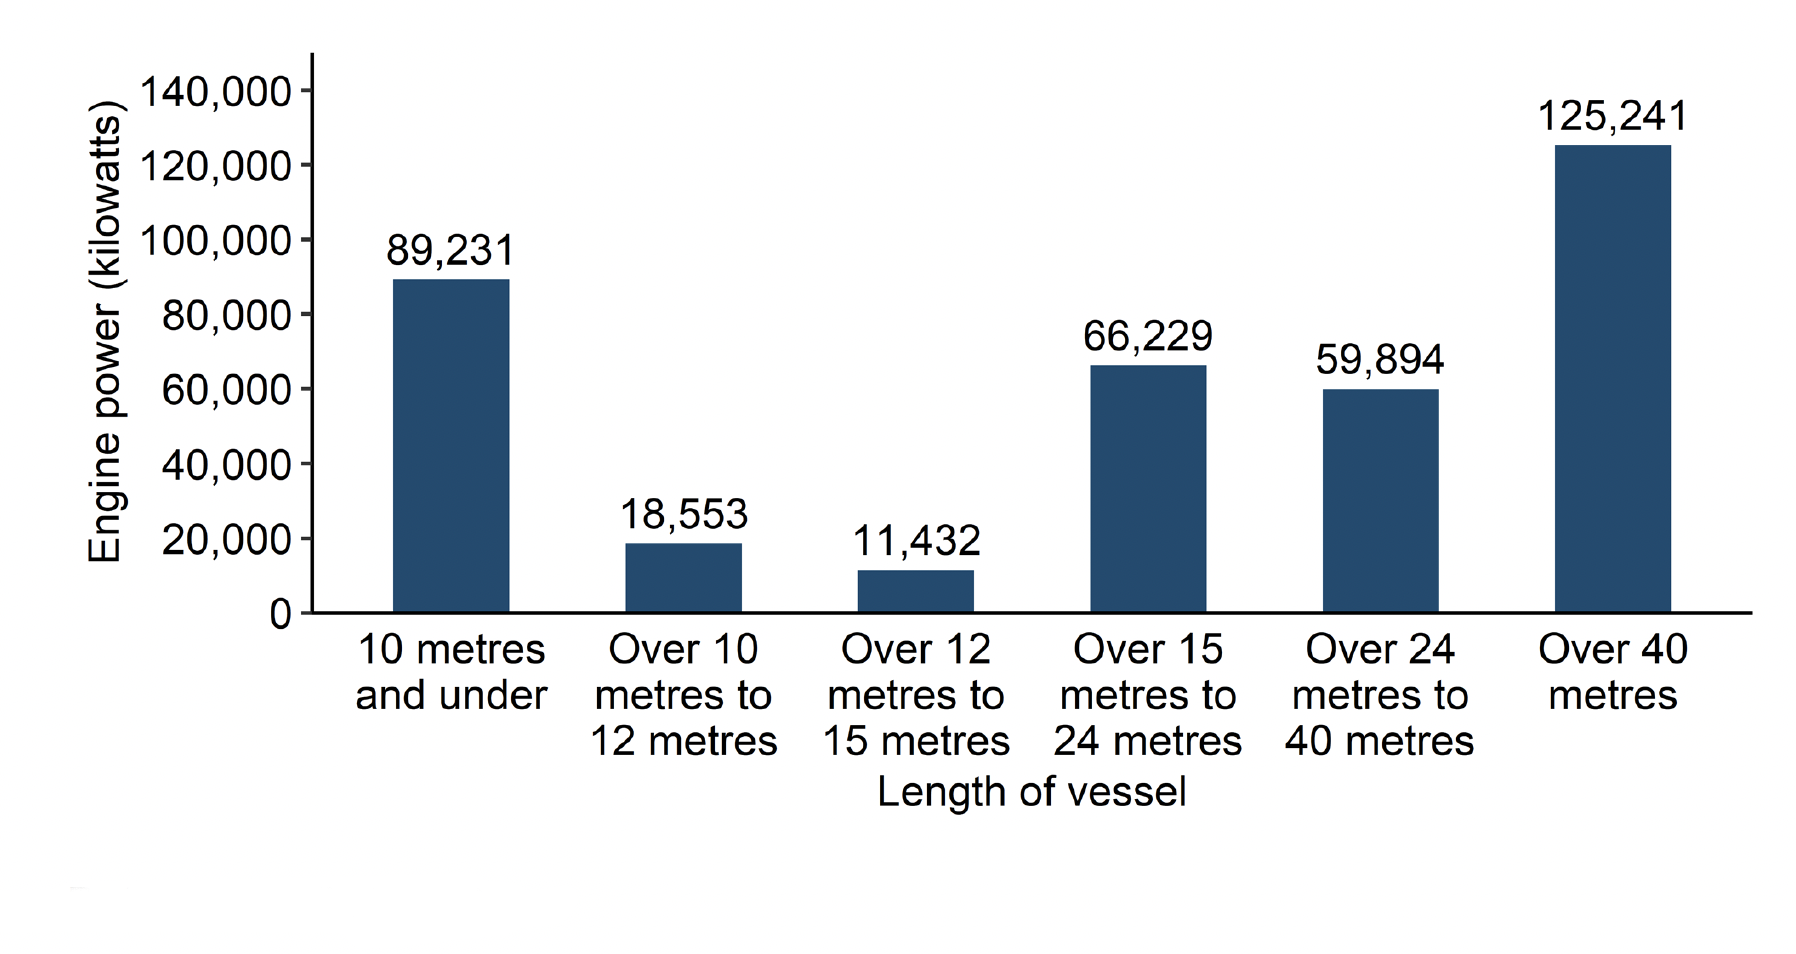 A bar chart showing the engine power in kilowatts of active Scottish fishing vessels by their length category in 2022. The chart shows that the length group with the largest total amount of engine power is the over 40 metre vessels, with the 10 metre and under vessels being second largest. 